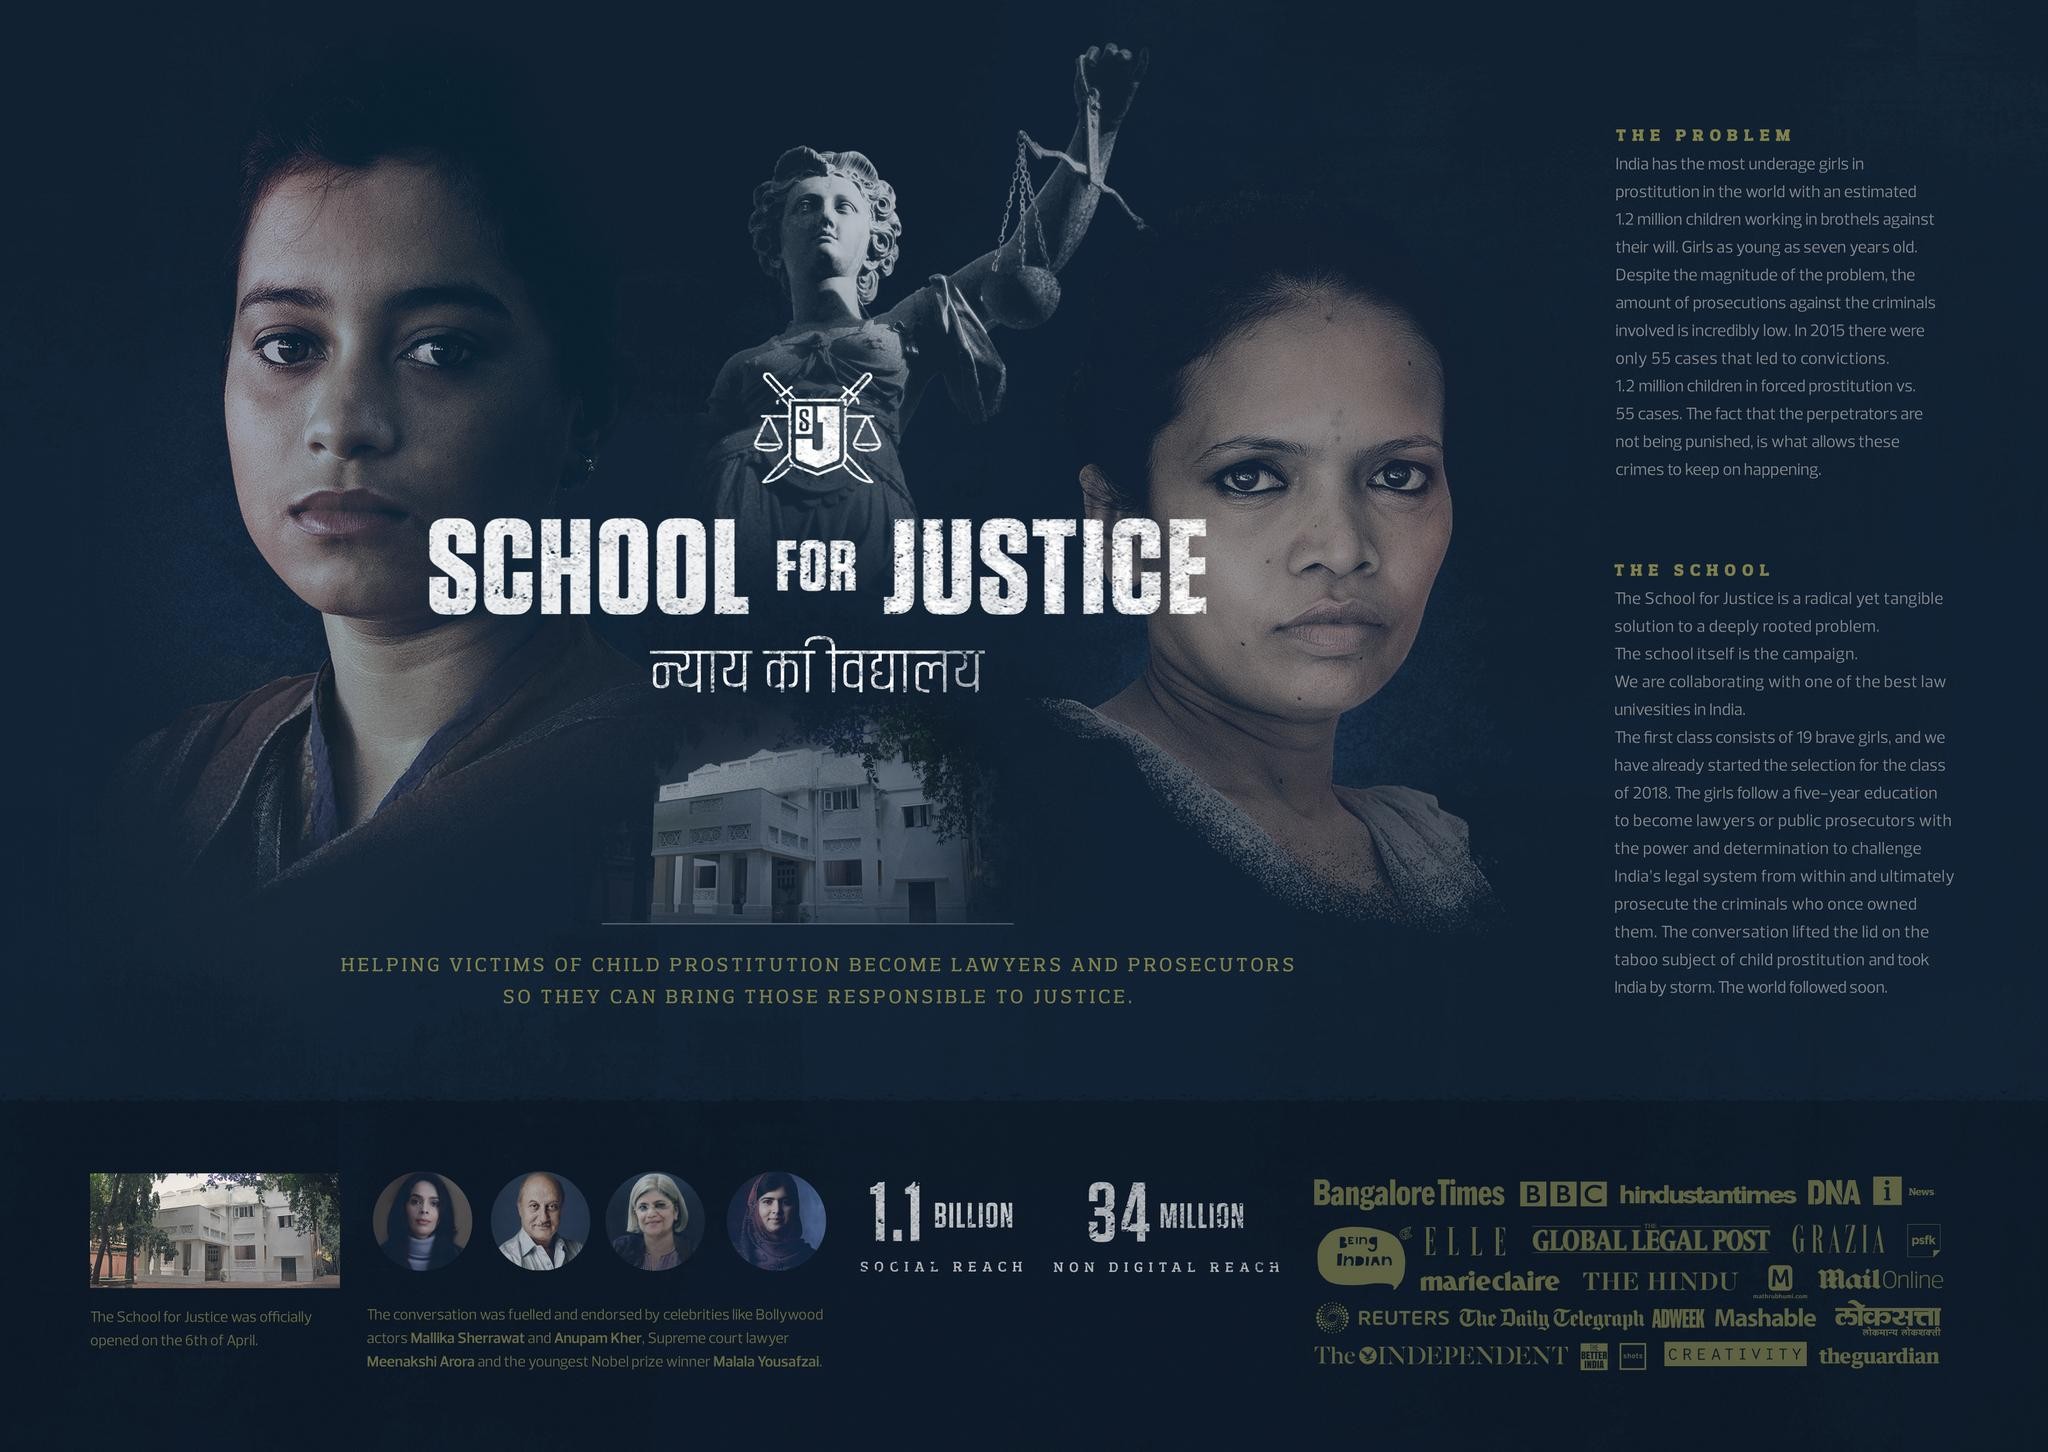 SCHOOL FOR JUSTICE